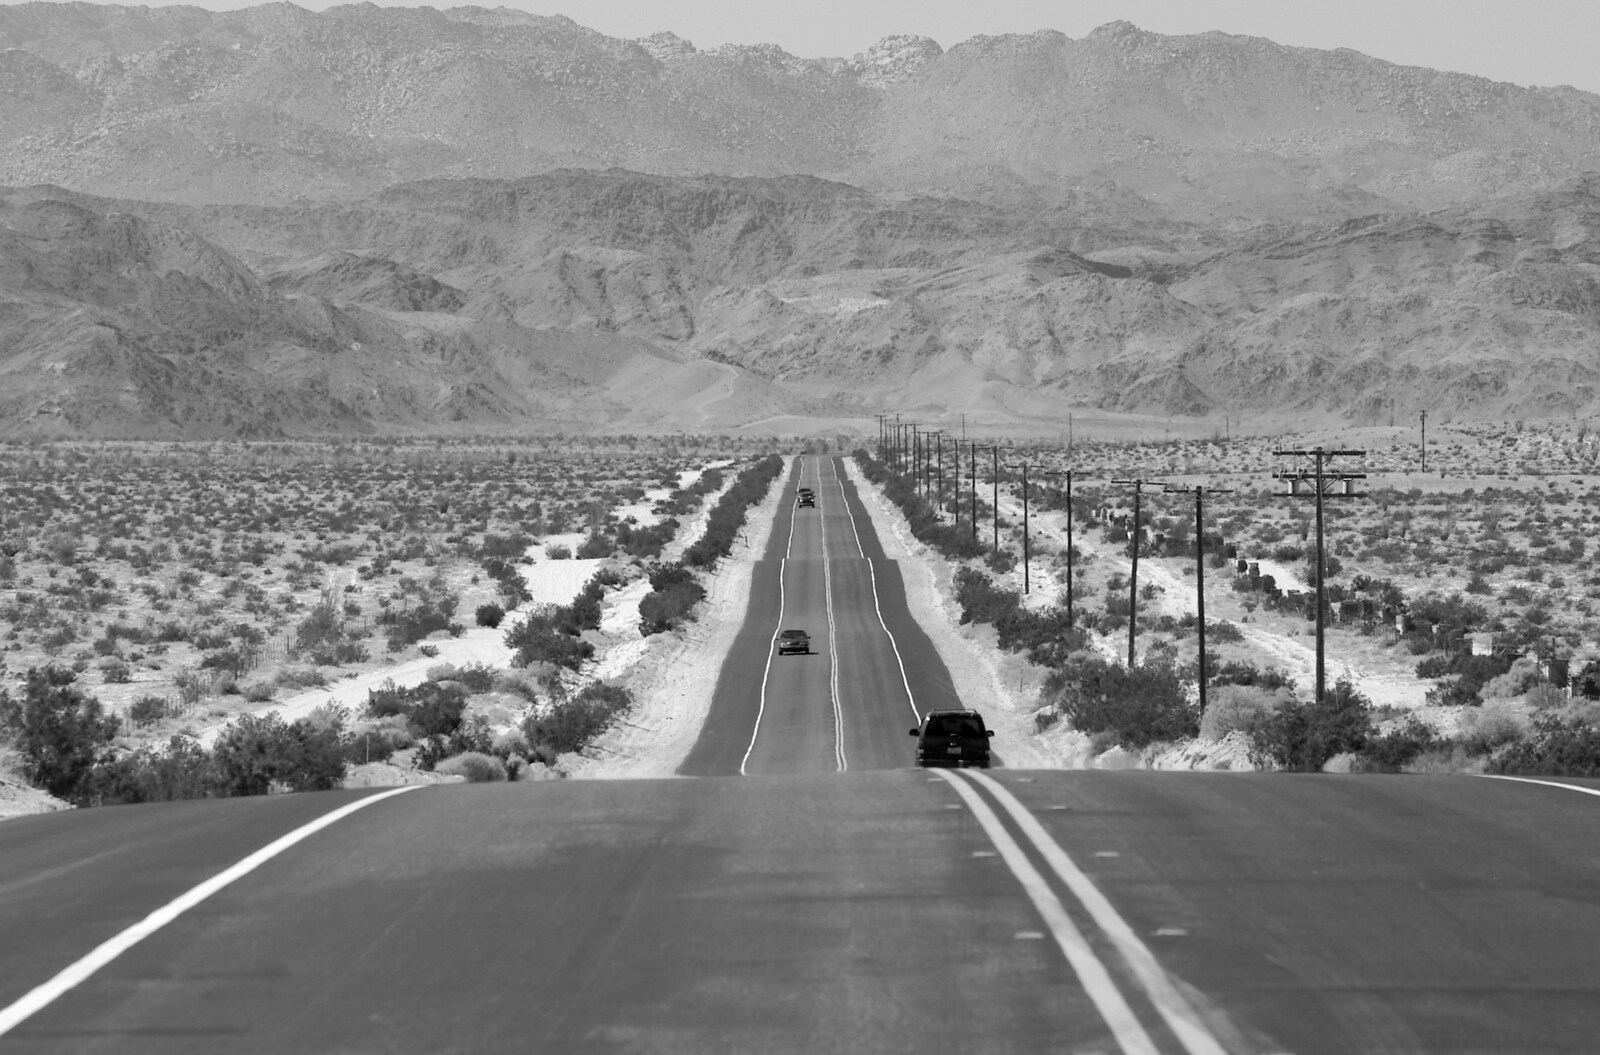 Cars on the ribbon of a highway from California Desert: El Centro, Imperial Valley, California, US - 24th September 2005